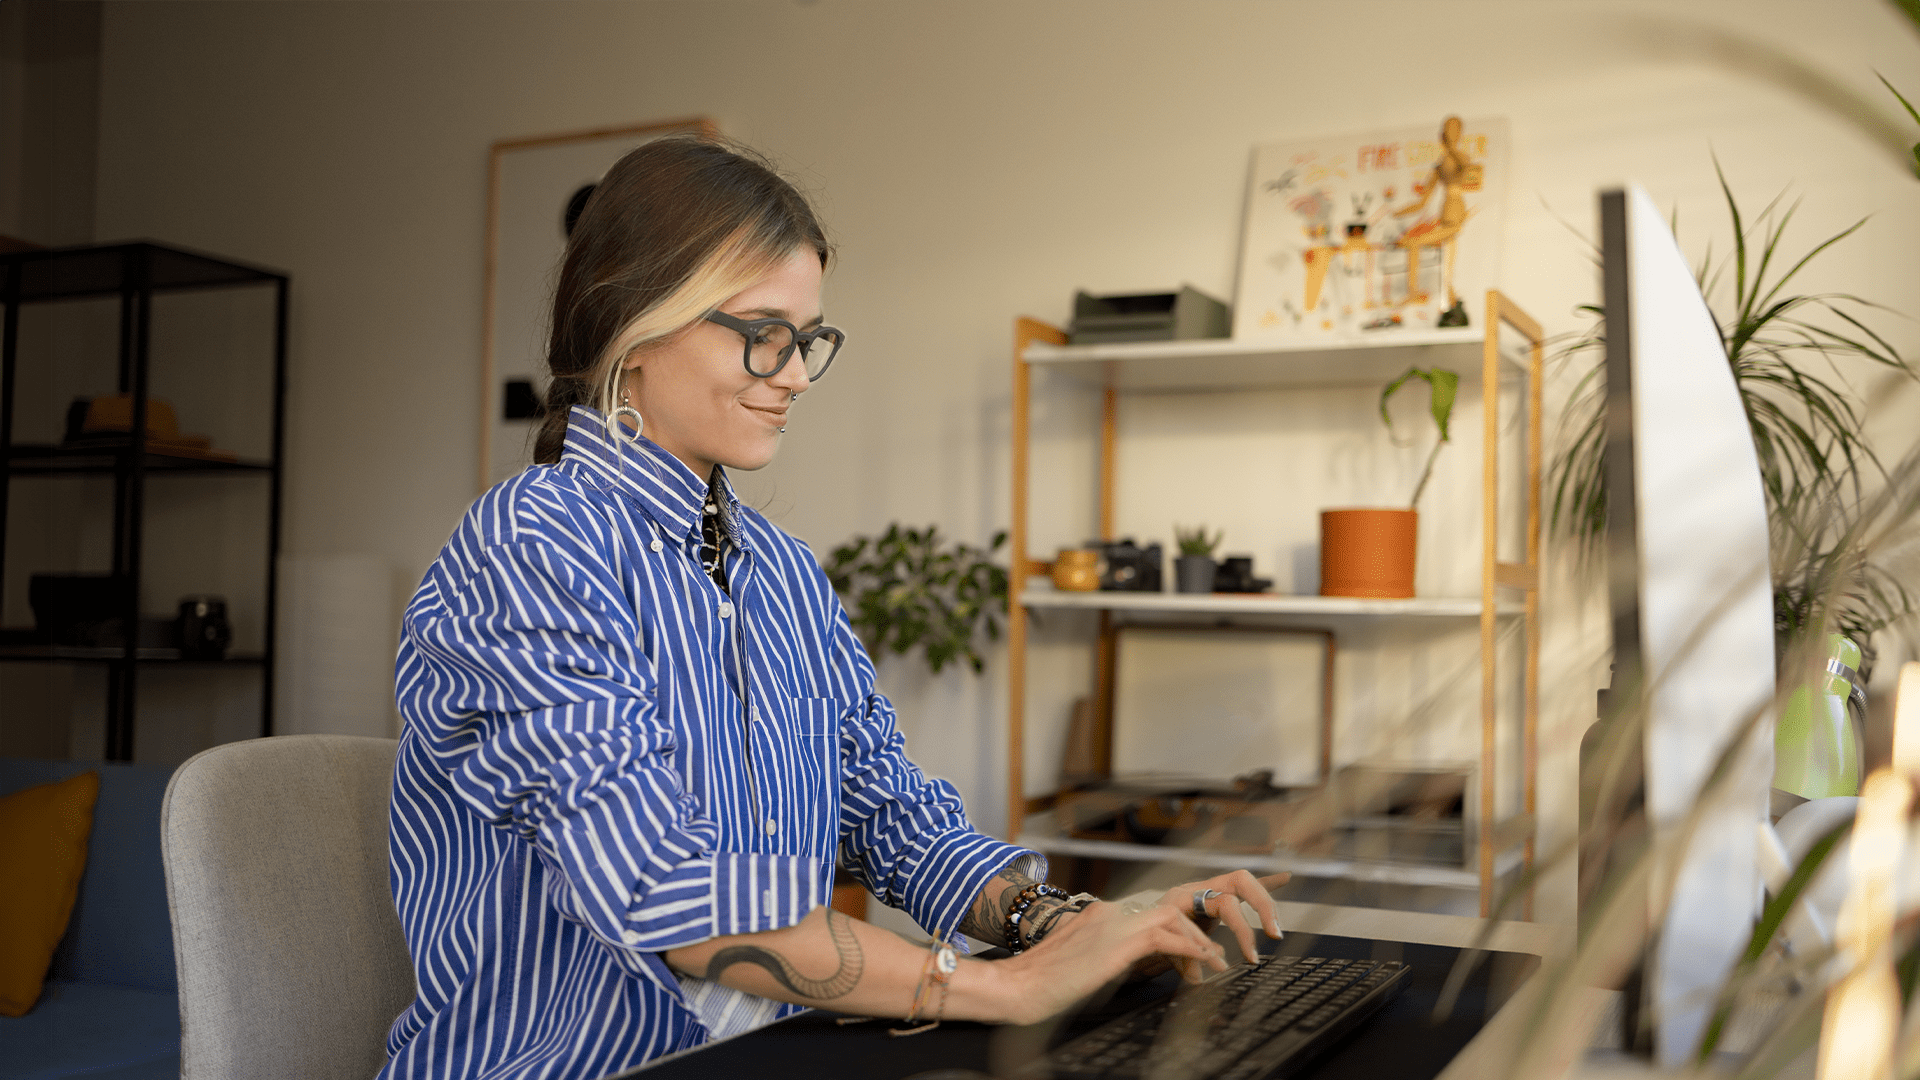 Cool woman with tattoos wearing a striped shirt working as a business systems analyst